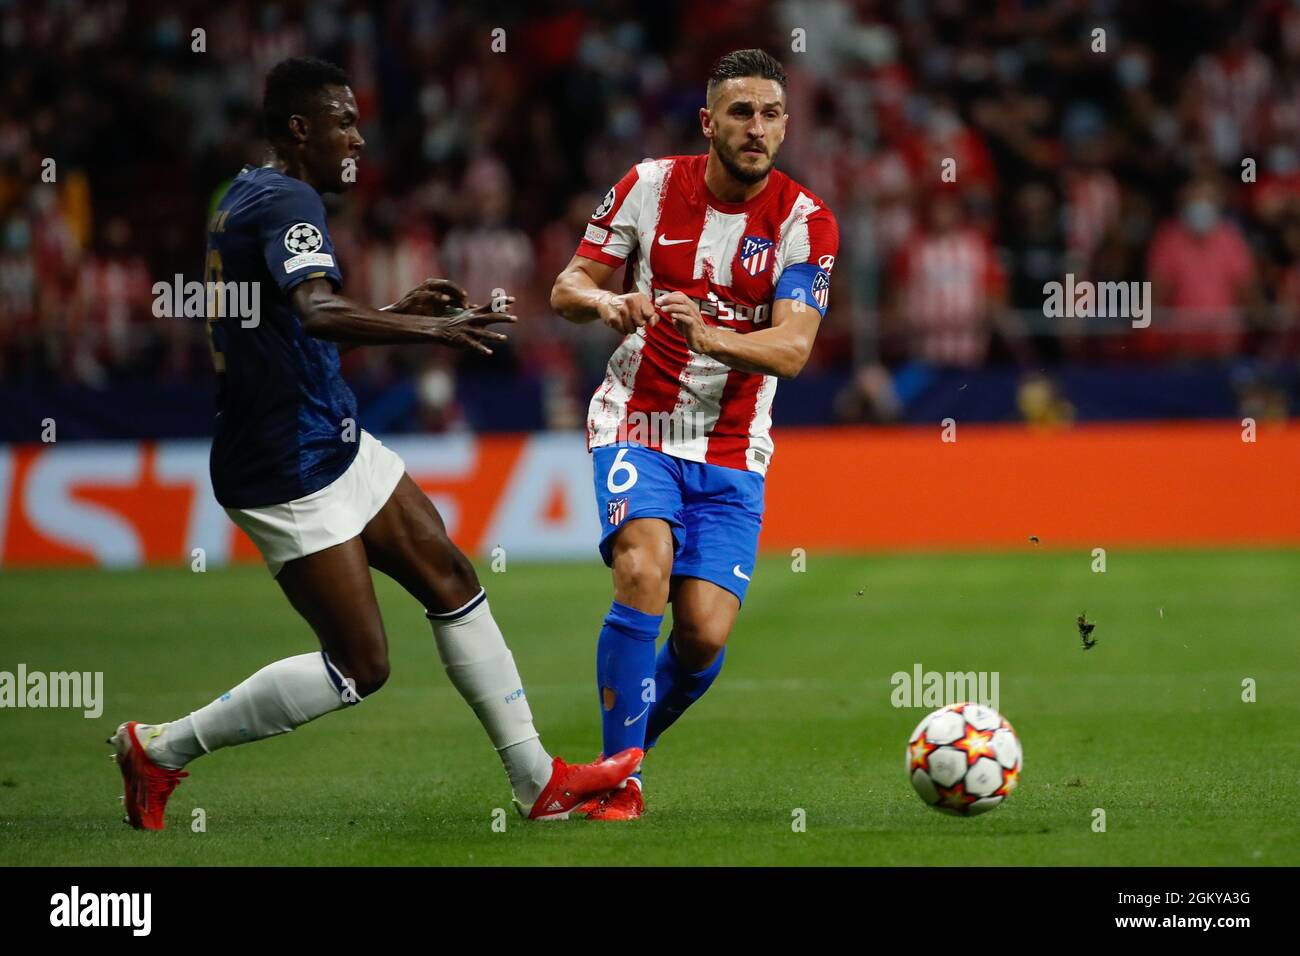 Madrid, Spain. 15th Sep 2021. Koke of Atletico de Madrid in action with Zaidu of FC Porto during the UEFA Champions League match between Atletico de Madrid and FC Porto at Wanda Metropolitano in Madrid, Spain. Credit: DAX Images/Alamy Live News Stock Photo